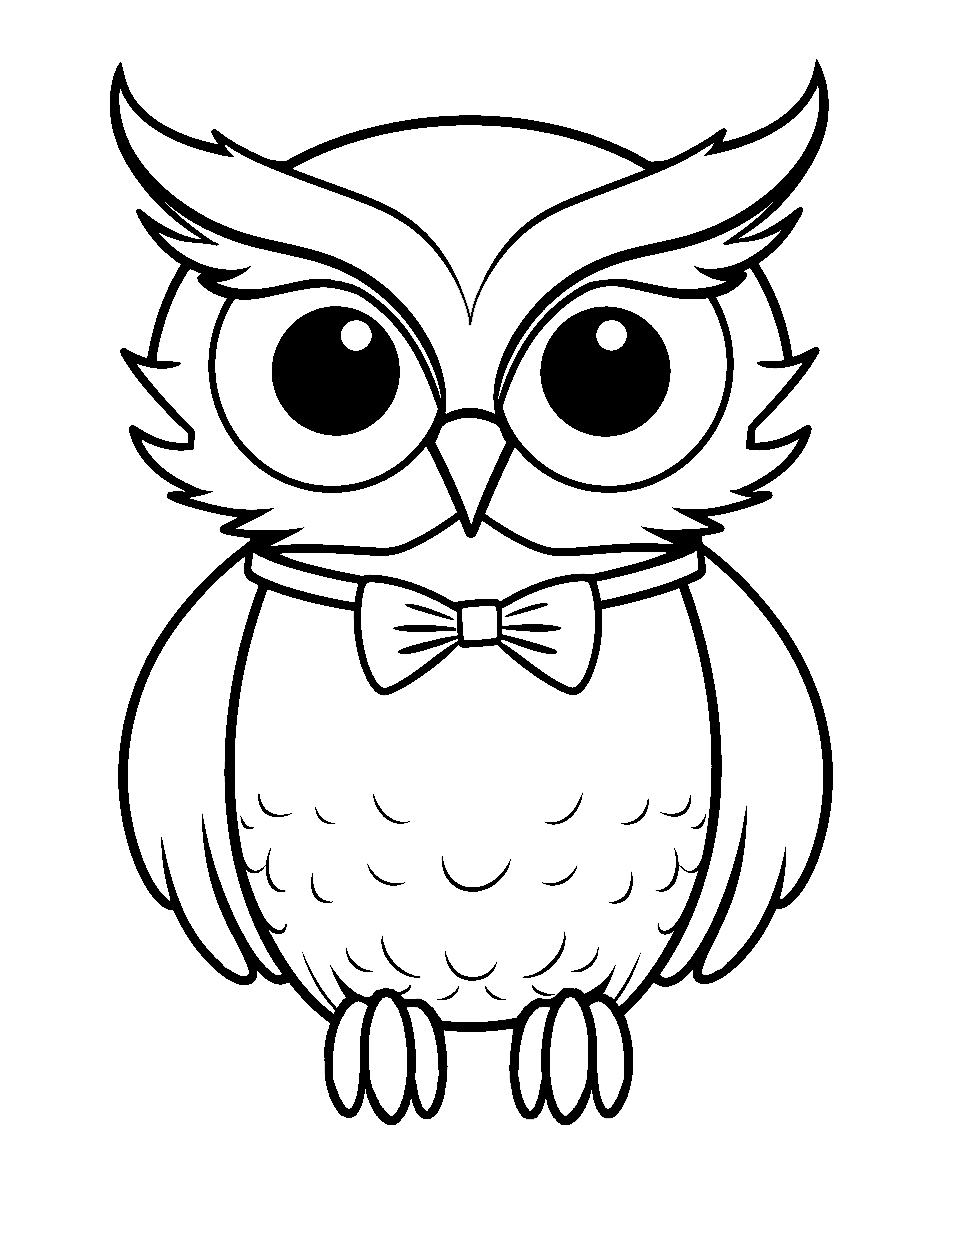 Owl with a Bow Tie Coloring Page - A dapper owl dressed up with a bow tie.